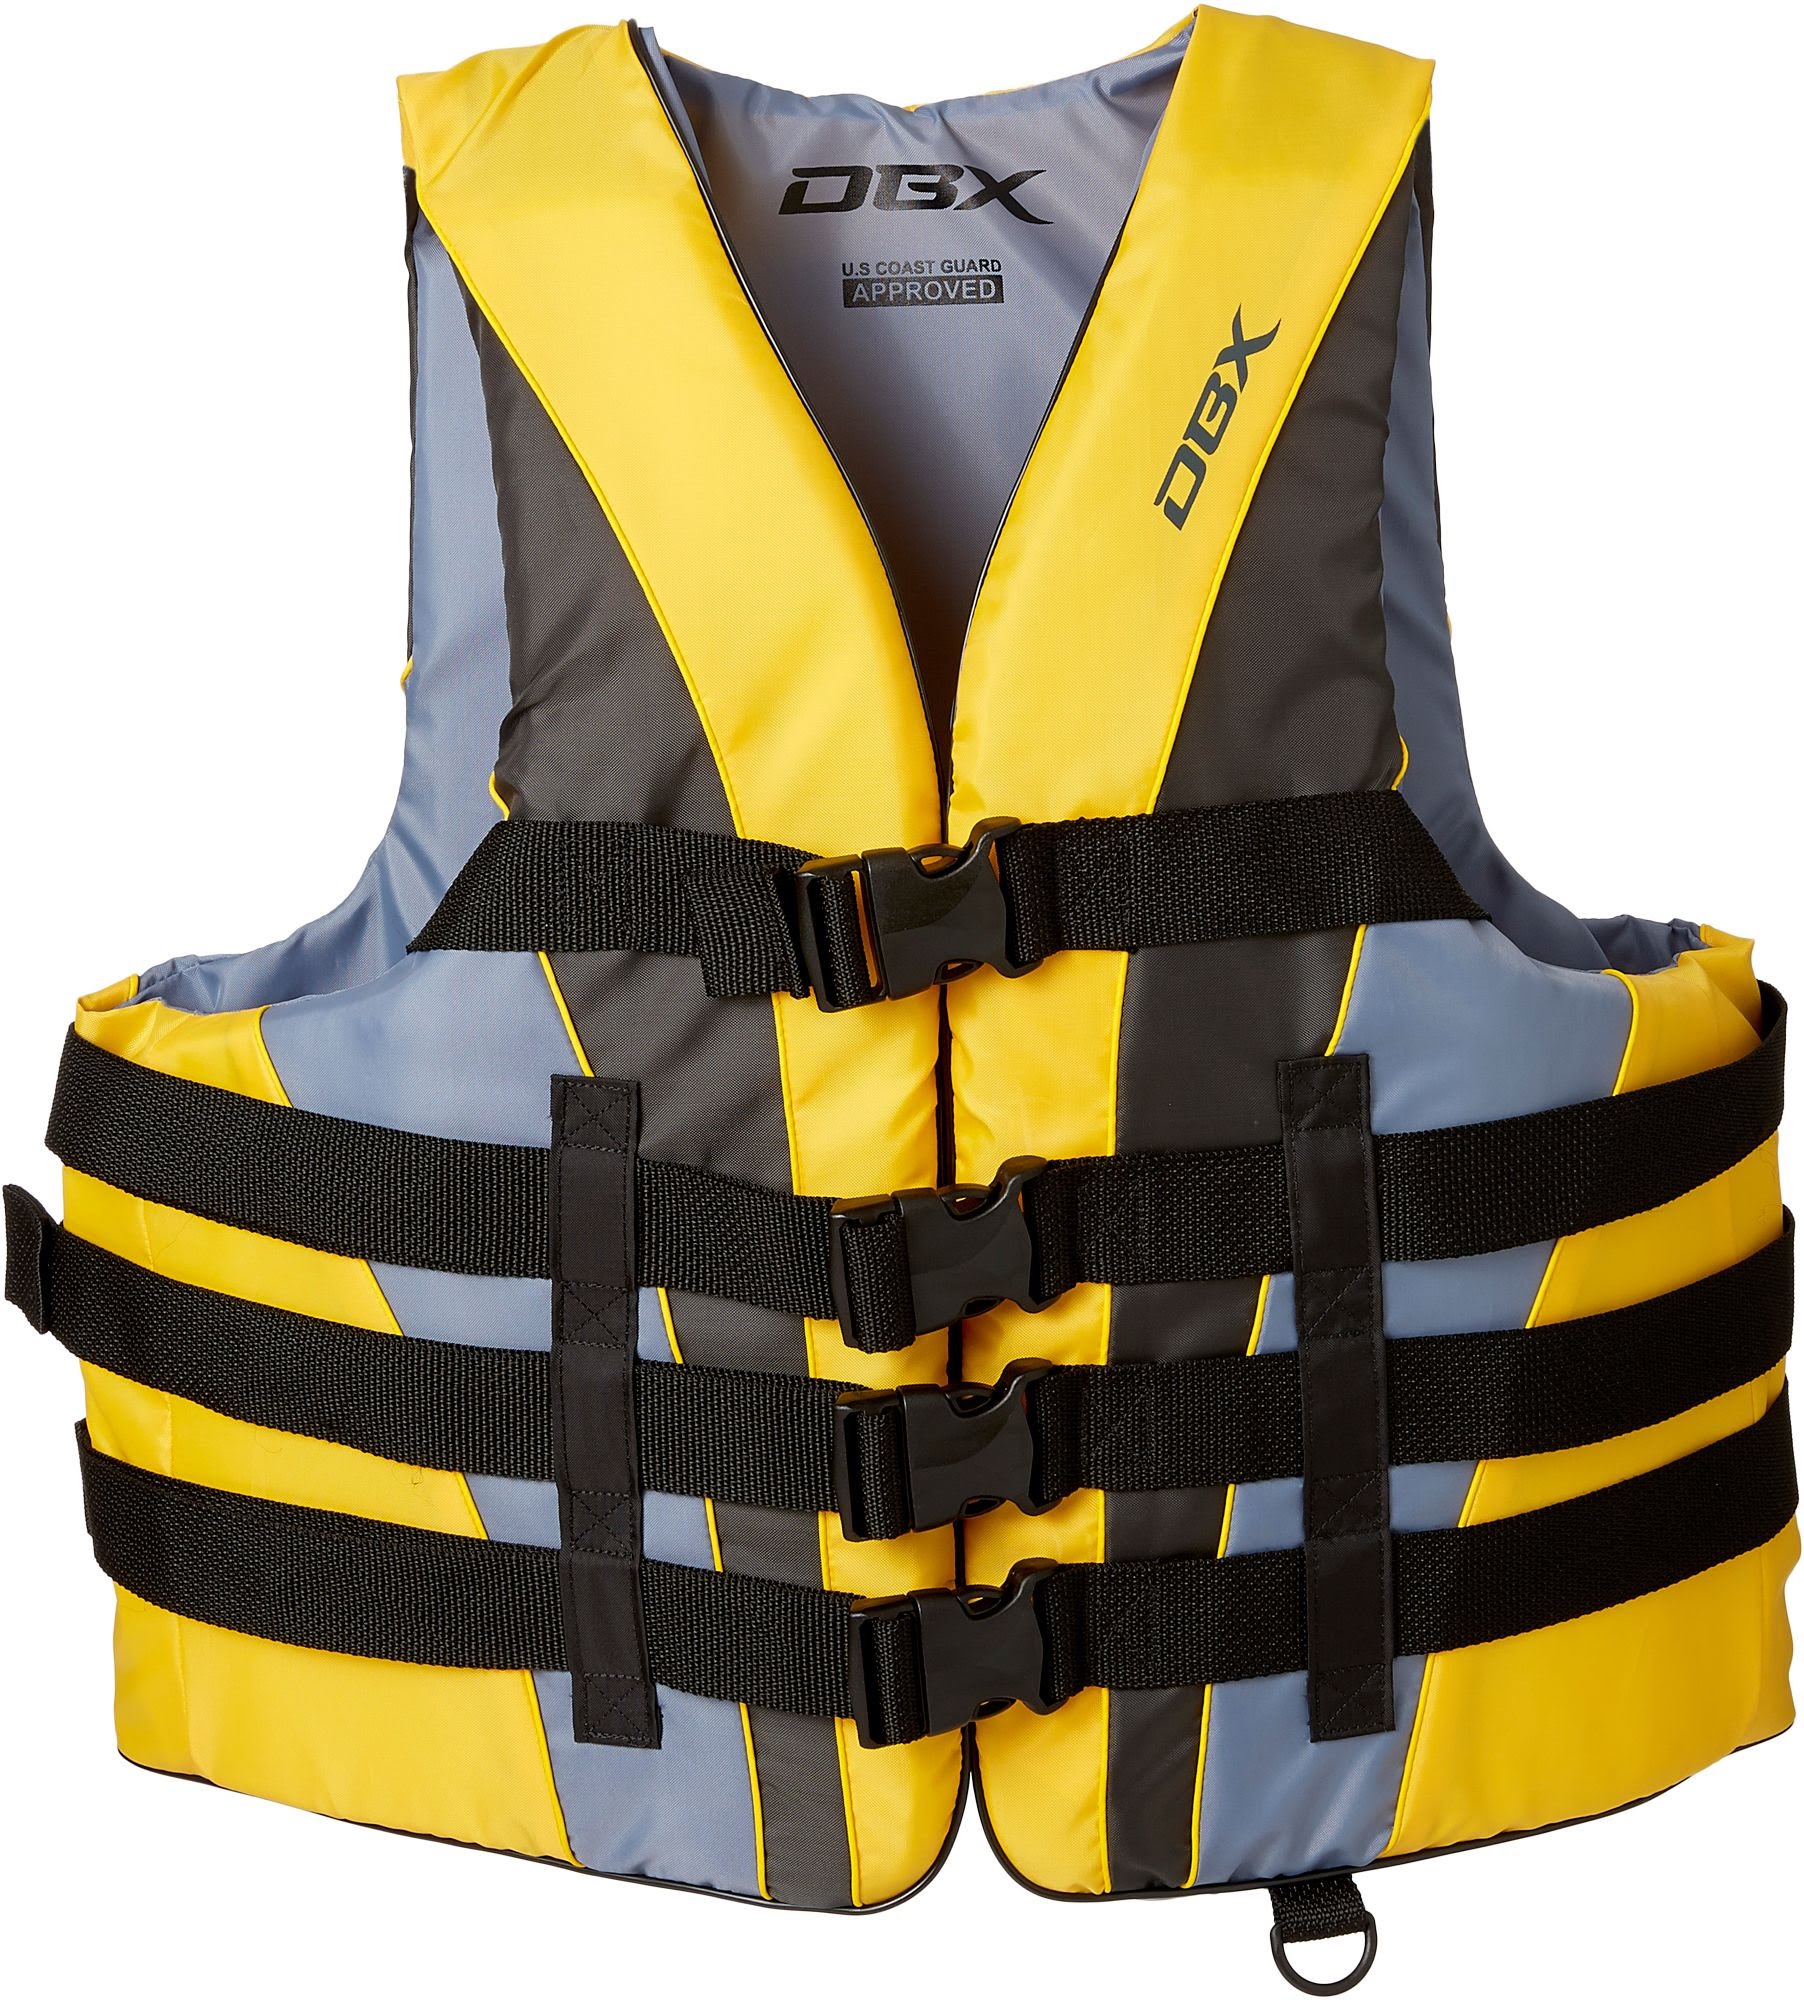 DBX 4 Buckle Nylon Life Vest, USCG Approved, Black/Yellow - Size S/M